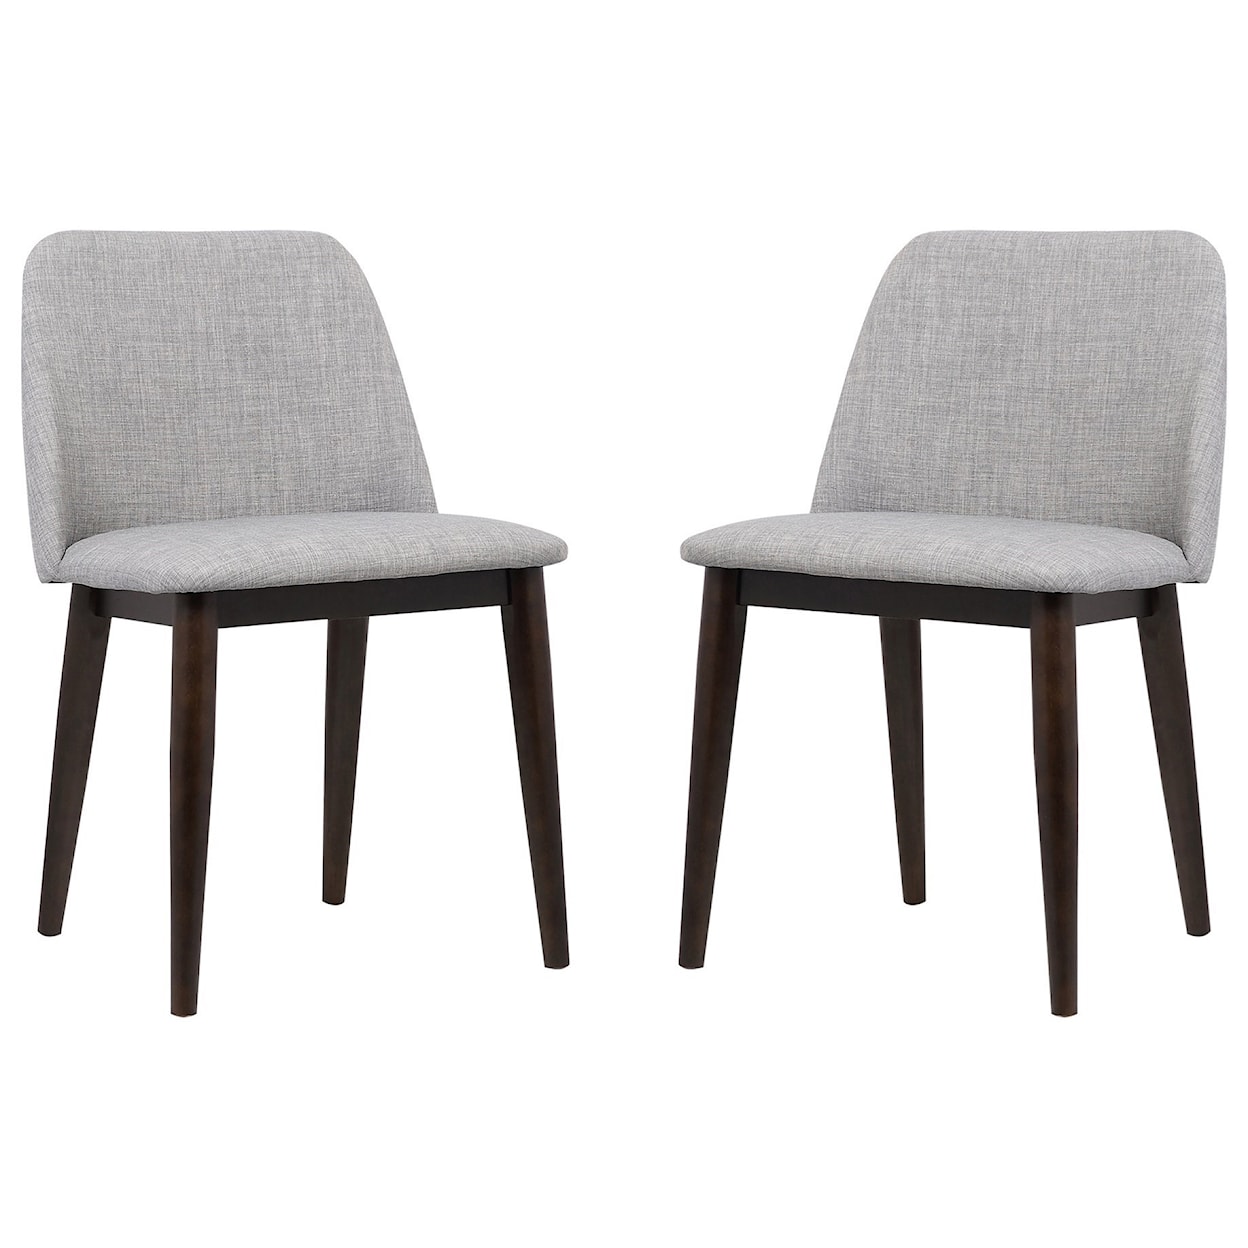 Armen Living Horizon Set of 2 Contemporary Dining Chairs